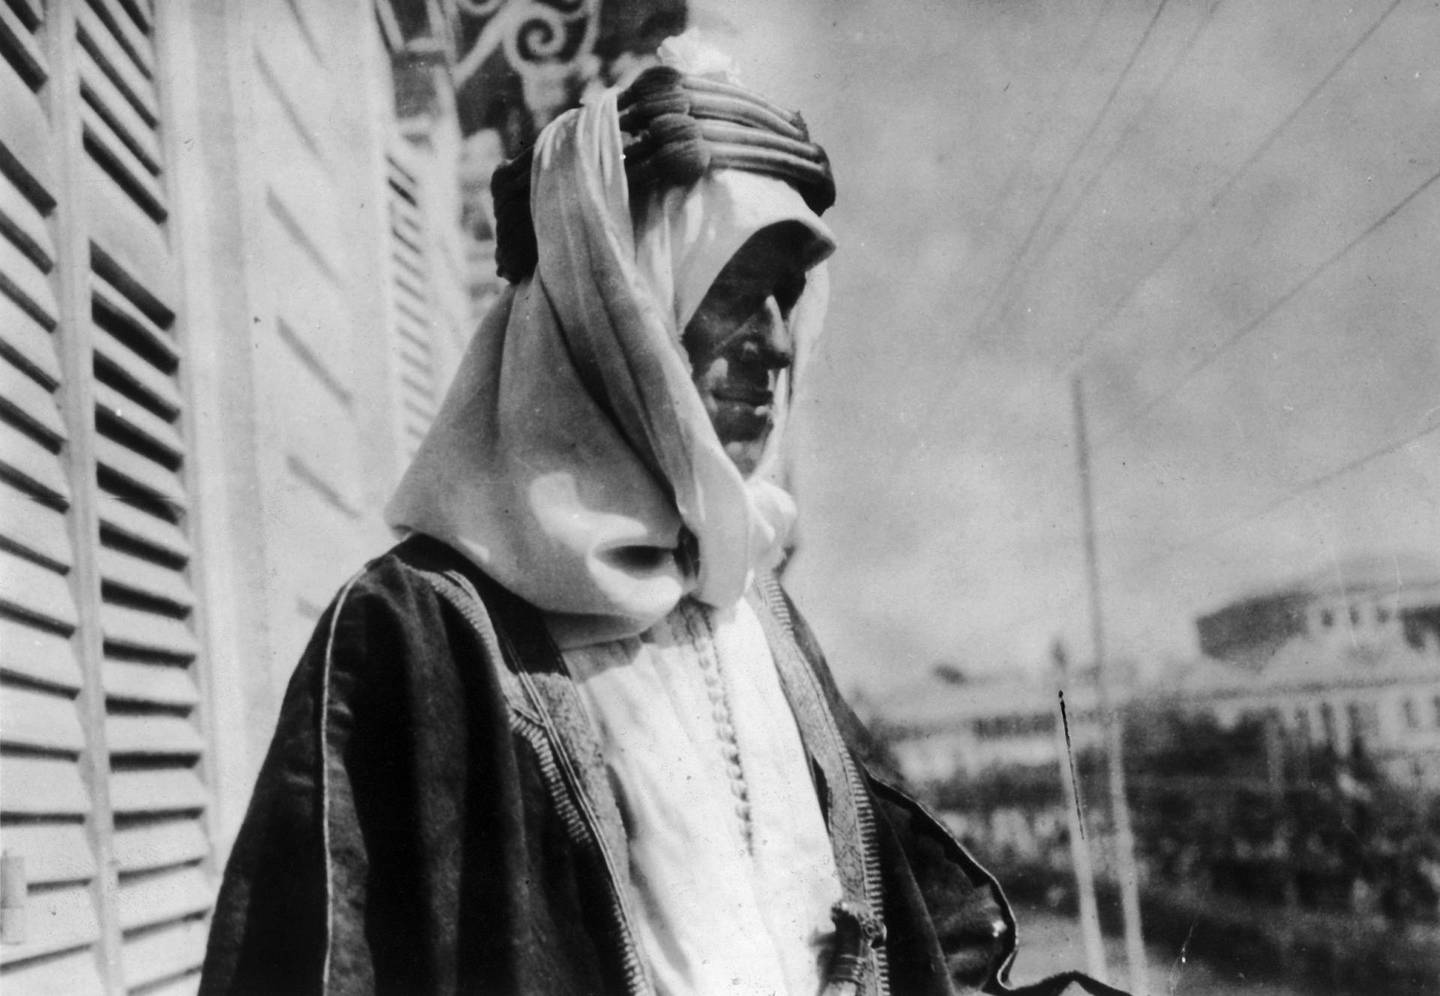 UNSPECIFIED - JANUARY 01:  Portrait of LAWRENCE OF ARABIA between 1914 and 1918. Born Thomas Edward LAWRENCE (1888-1935), he was a British adventurer, officer and writer. When an agent to the British secret services, he played an important role in the uprising of the Arabs against the Turks during the First World War.  (Photo by Keystone-France/Gamma-Keystone via Getty Images)